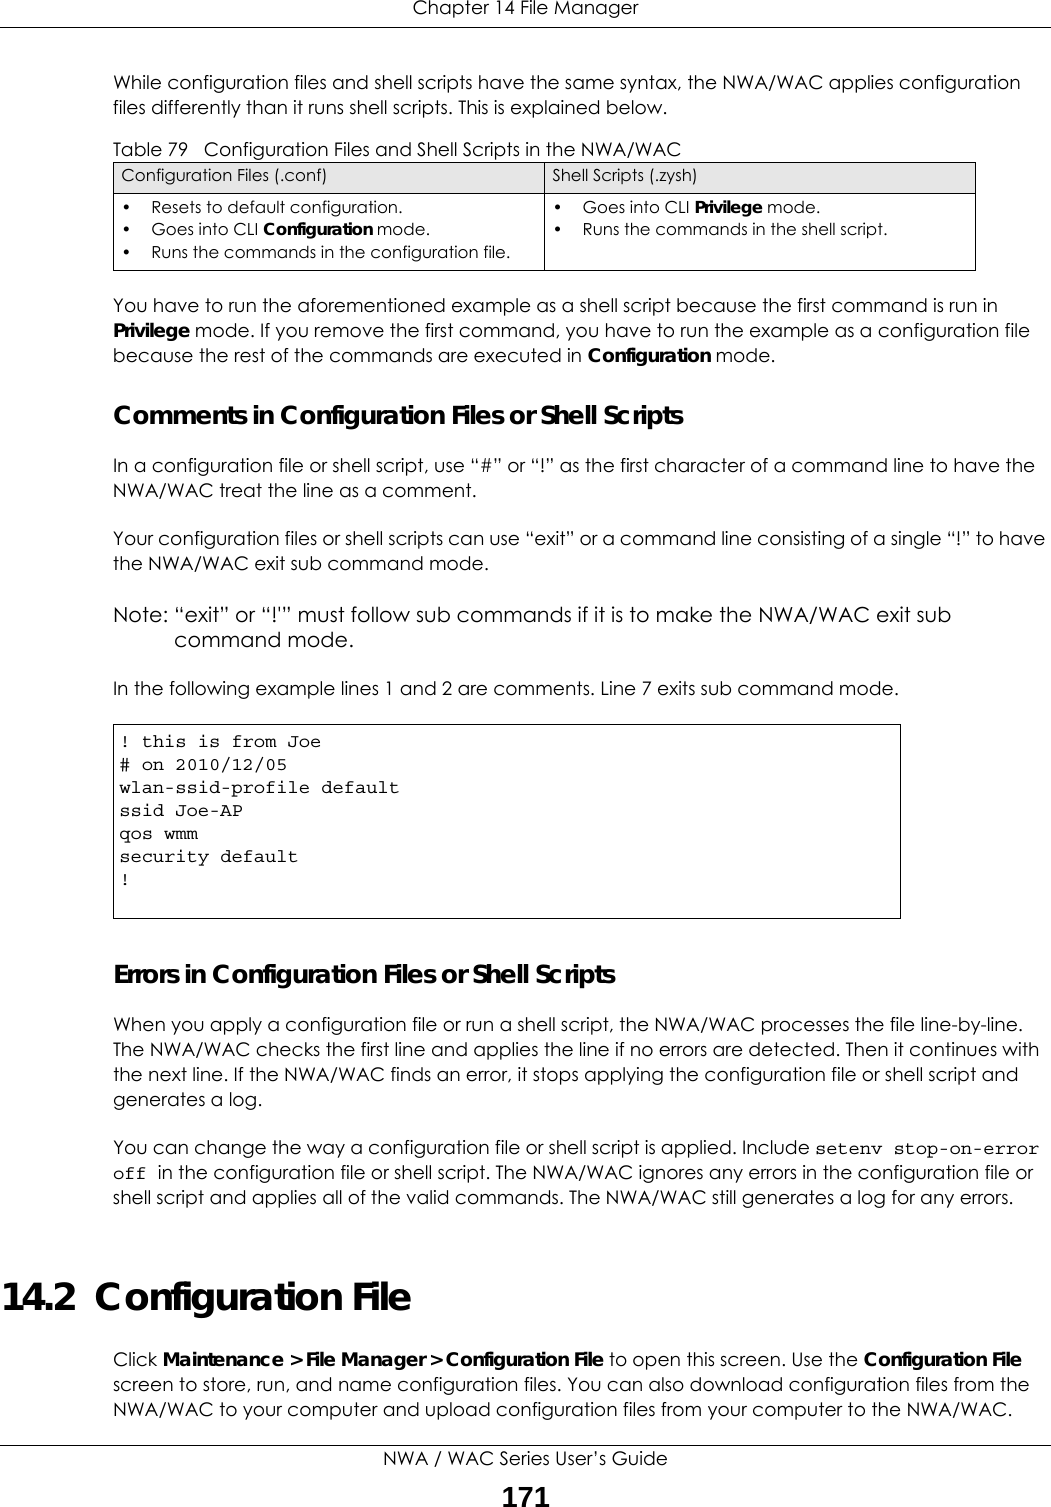 Chapter 14 File ManagerNWA / WAC Series User’s Guide171While configuration files and shell scripts have the same syntax, the NWA/WAC applies configuration files differently than it runs shell scripts. This is explained below.You have to run the aforementioned example as a shell script because the first command is run in Privilege mode. If you remove the first command, you have to run the example as a configuration file because the rest of the commands are executed in Configuration mode.Comments in Configuration Files or Shell ScriptsIn a configuration file or shell script, use “#” or “!” as the first character of a command line to have the NWA/WAC treat the line as a comment. Your configuration files or shell scripts can use “exit” or a command line consisting of a single “!” to have the NWA/WAC exit sub command mode.Note: “exit” or “!&apos;” must follow sub commands if it is to make the NWA/WAC exit sub command mode.In the following example lines 1 and 2 are comments. Line 7 exits sub command mode. Errors in Configuration Files or Shell ScriptsWhen you apply a configuration file or run a shell script, the NWA/WAC processes the file line-by-line. The NWA/WAC checks the first line and applies the line if no errors are detected. Then it continues with the next line. If the NWA/WAC finds an error, it stops applying the configuration file or shell script and generates a log. You can change the way a configuration file or shell script is applied. Include setenv stop-on-error off in the configuration file or shell script. The NWA/WAC ignores any errors in the configuration file or shell script and applies all of the valid commands. The NWA/WAC still generates a log for any errors. 14.2  Configuration FileClick Maintenance &gt; File Manager &gt; Configuration File to open this screen. Use the Configuration File screen to store, run, and name configuration files. You can also download configuration files from the NWA/WAC to your computer and upload configuration files from your computer to the NWA/WAC.Table 79   Configuration Files and Shell Scripts in the NWA/WACConfiguration Files (.conf) Shell Scripts (.zysh)• Resets to default configuration.•Goes into CLI Configuration mode.• Runs the commands in the configuration file.•Goes into CLI Privilege mode.• Runs the commands in the shell script.! this is from Joe# on 2010/12/05wlan-ssid-profile defaultssid Joe-APqos wmmsecurity default!